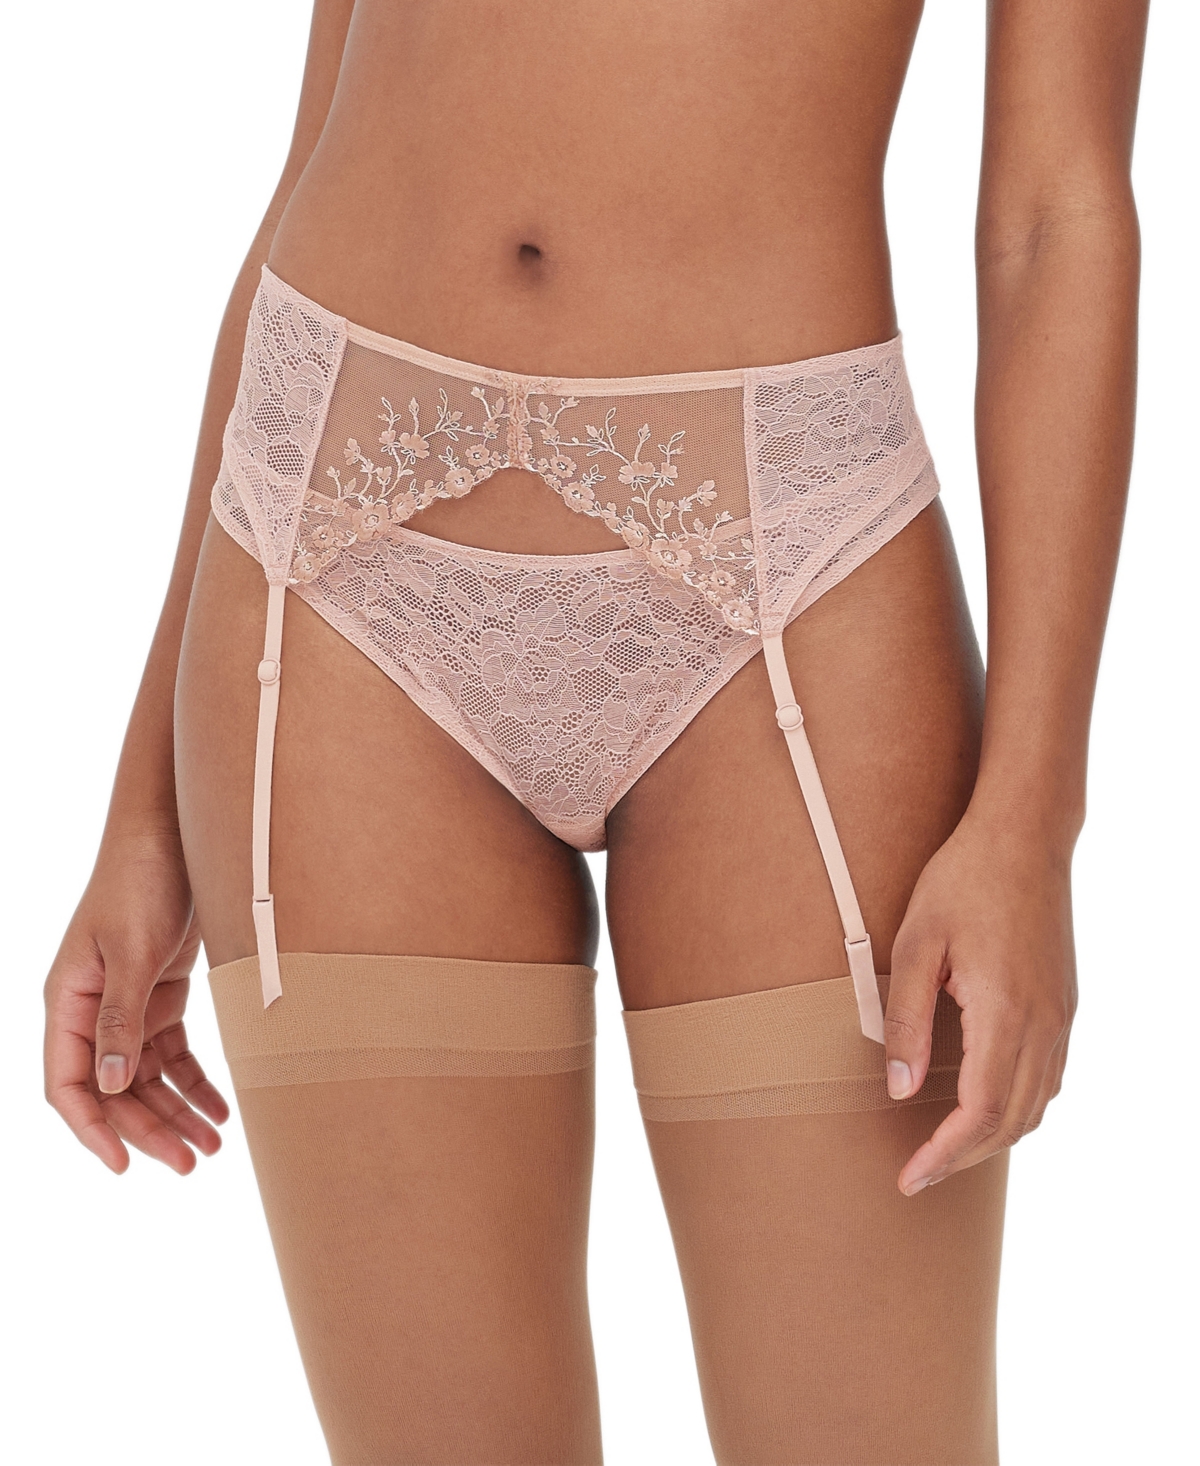 Women's Paradise Embroidered Floral Lace Garter Belt - Romance combo